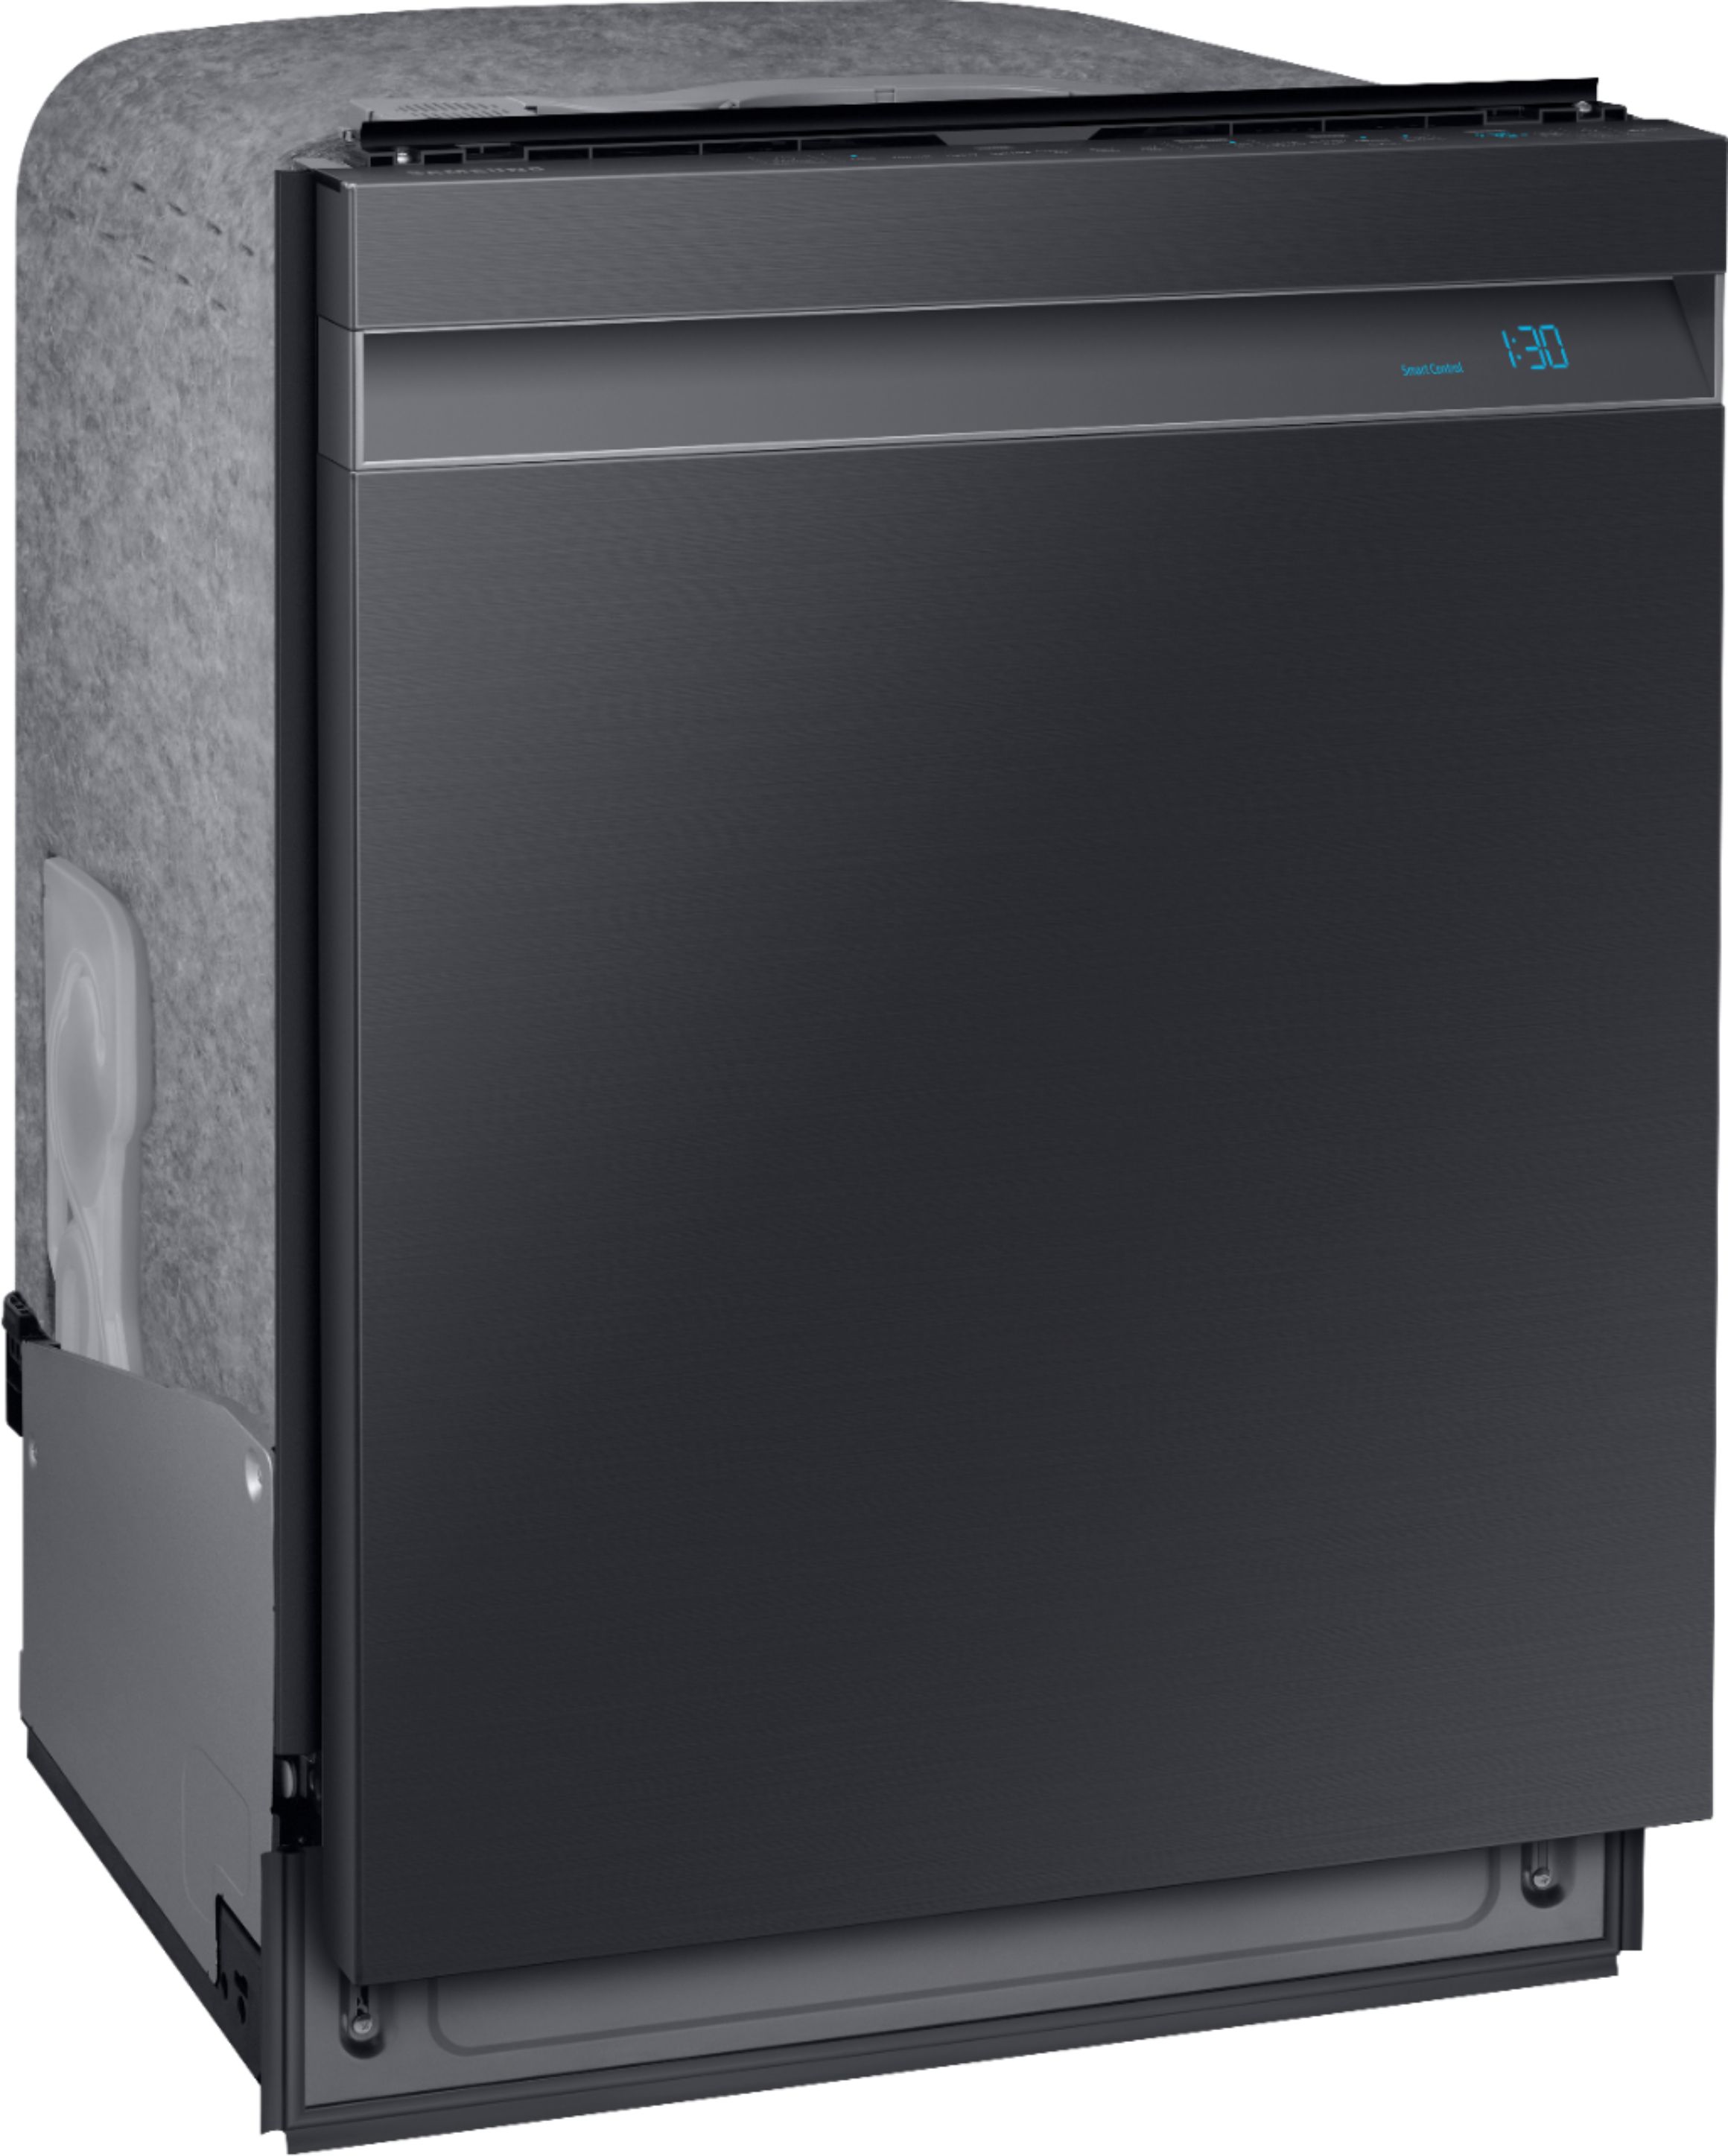 Angle View: Samsung - AutoRelease Smart Built-In Dishwasher with Linear Wash, 39dBA - Black Stainless Steel